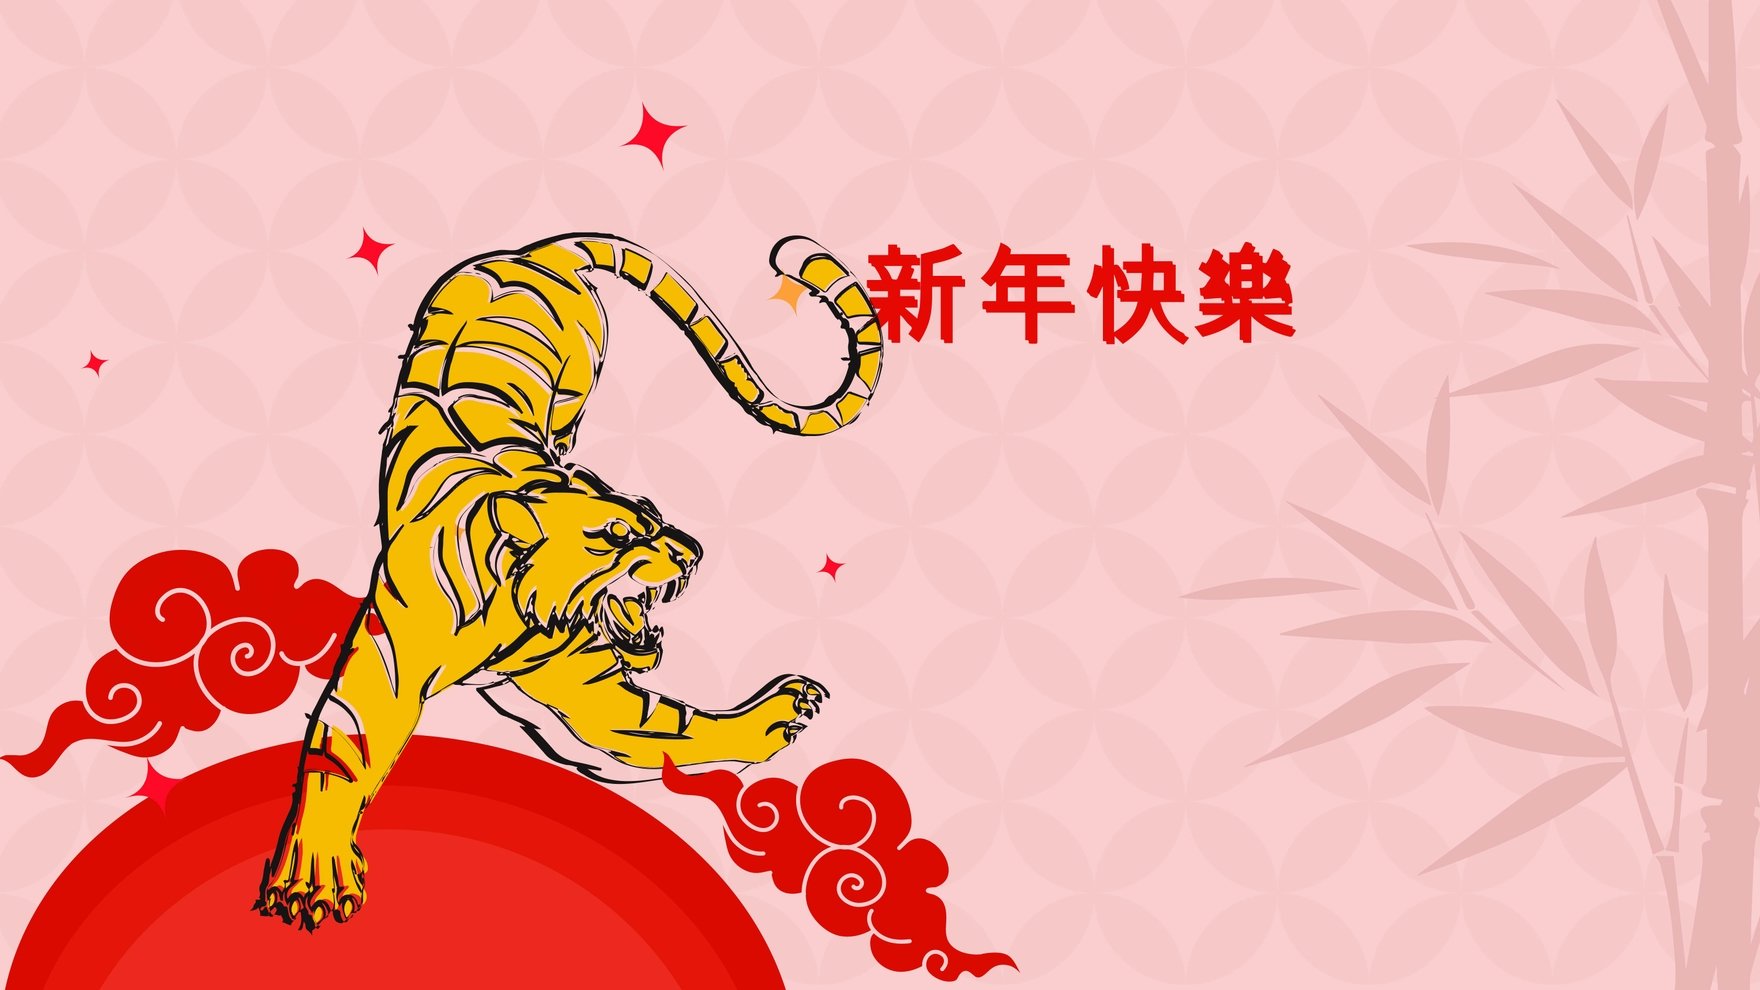 Free Chinese New Year Wallpaper Background in PDF, Illustrator, PSD, EPS, SVG, JPG, PNG